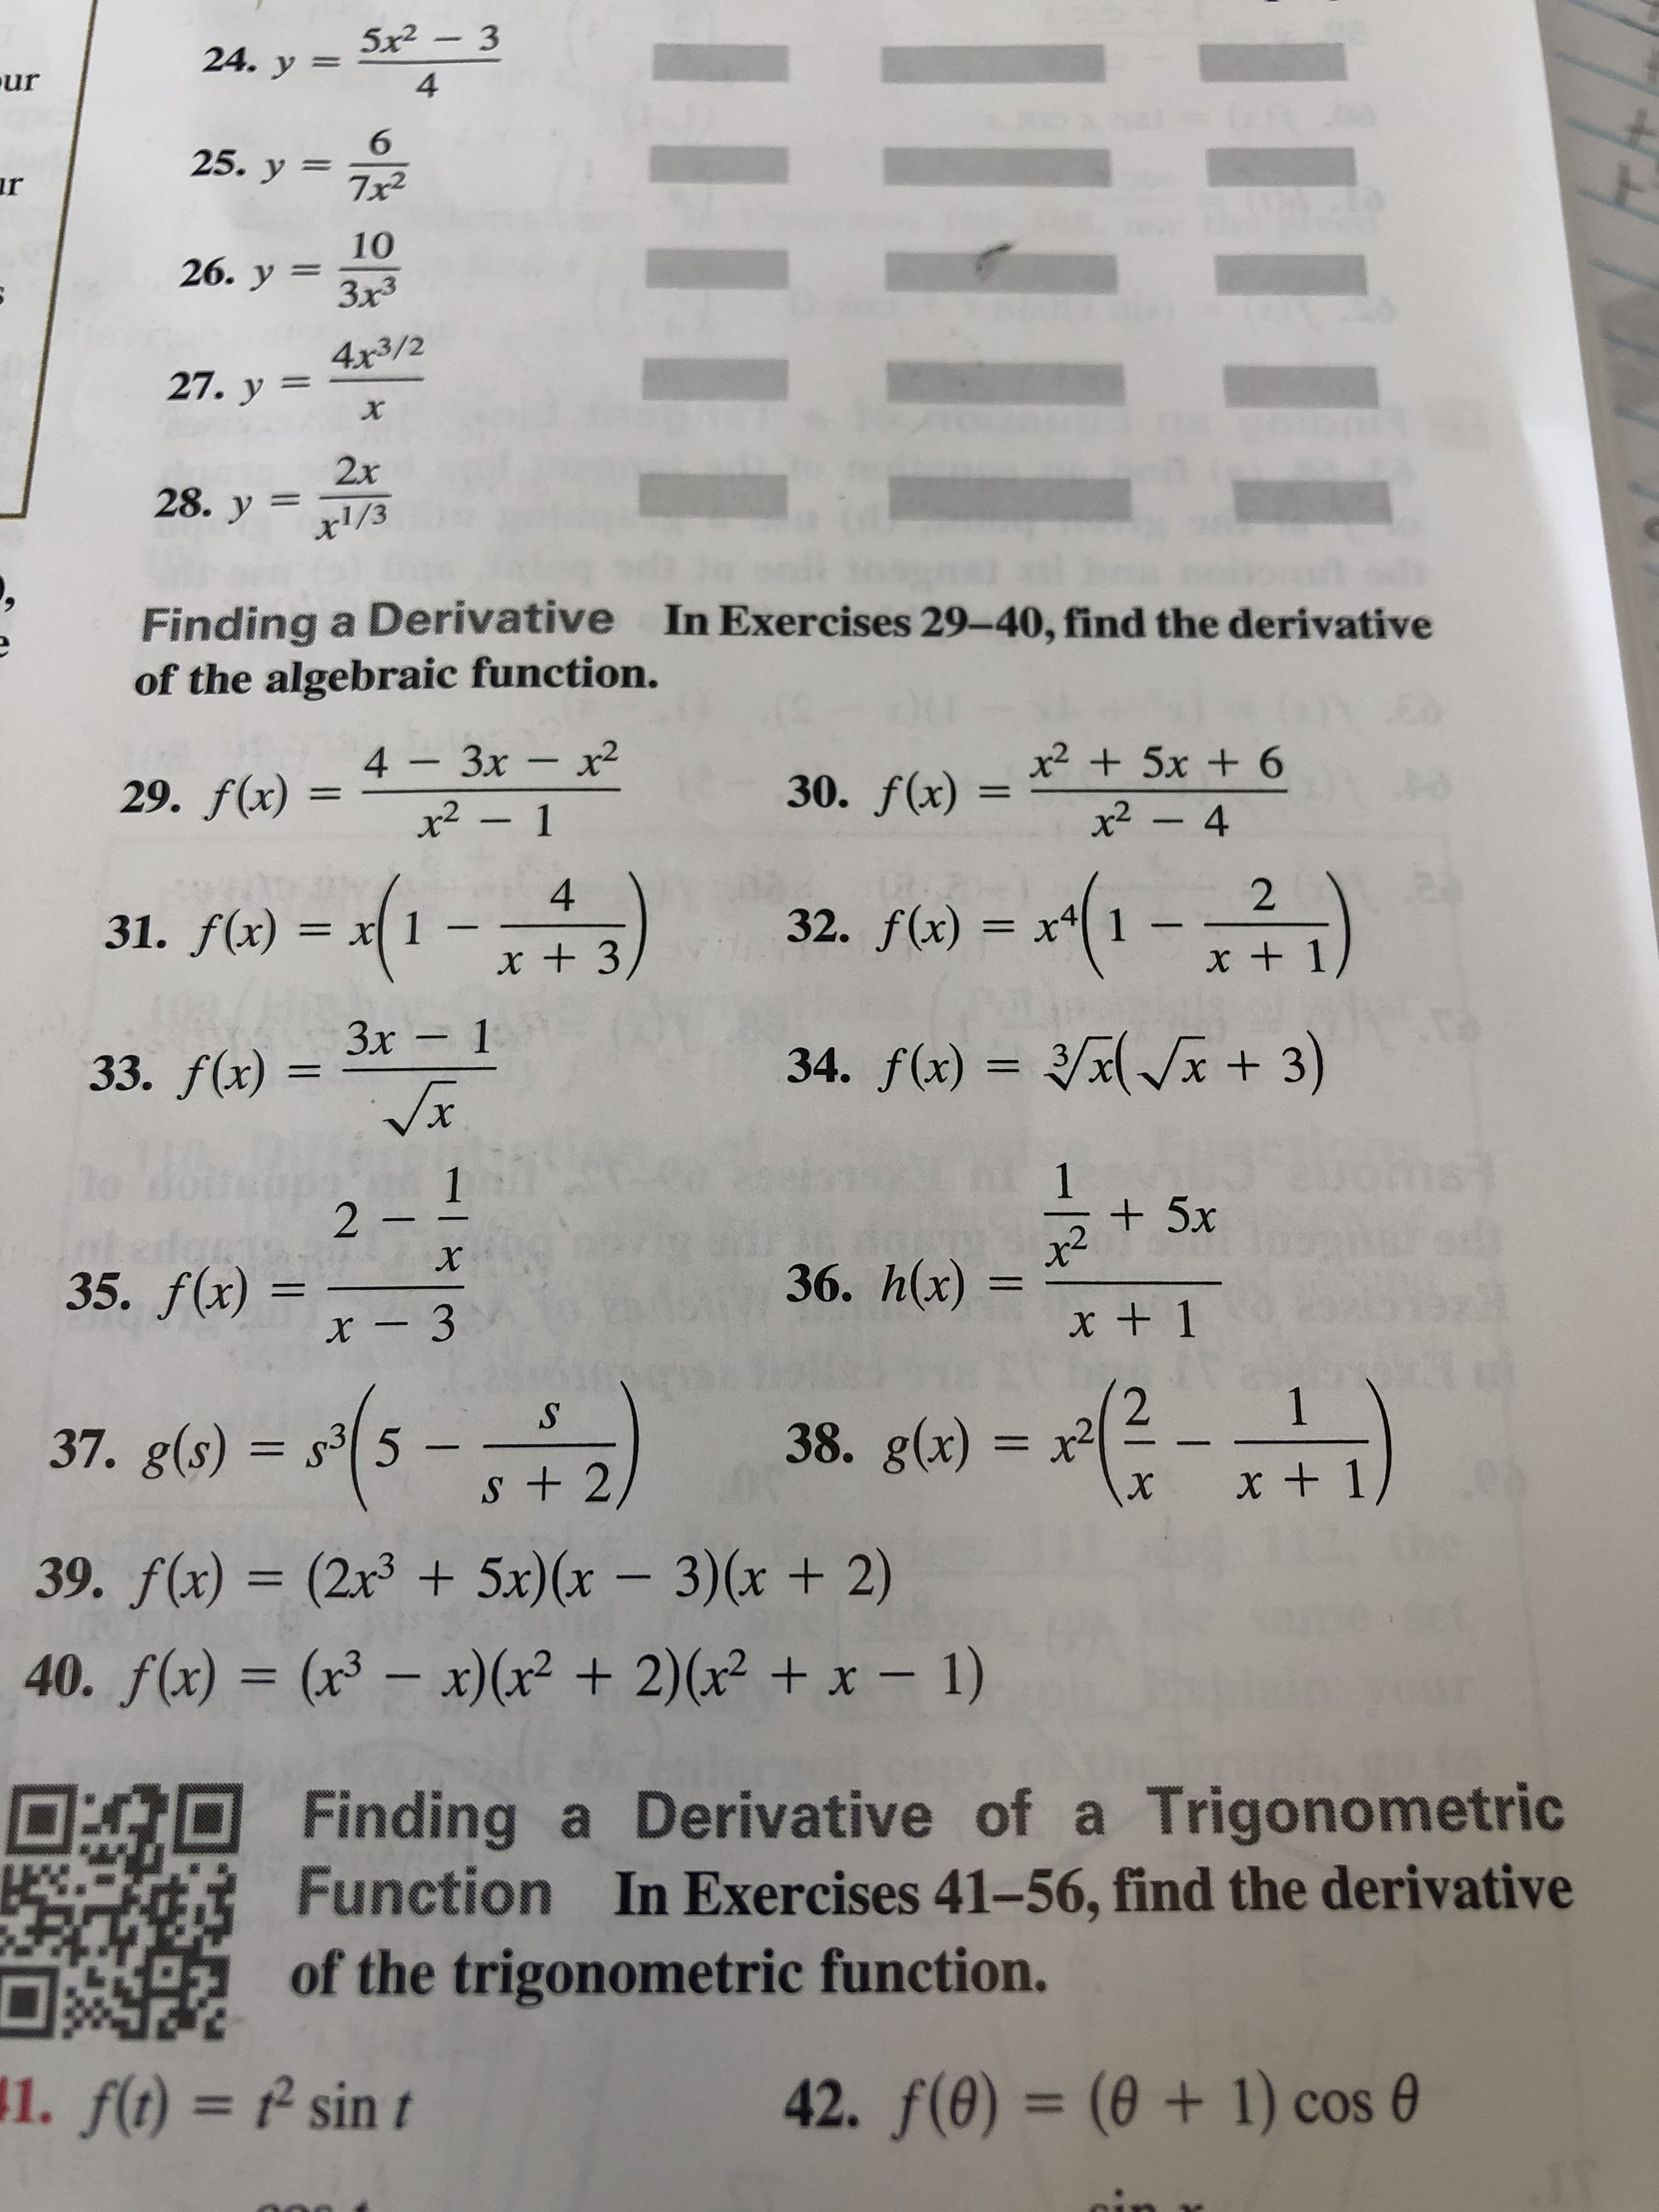 5x2-3
24. y=
ur
4
GRE
6
25. y
7x2
r
Io
10
26. y 3x3
Зx3
4x3/2
27. у 3
x
2x
28. y 1/3
Finding a Derivative In Exercises 29-40, find the derivative
of the algebraic function.
x25x + 6
x2- 4
4 - Зх - х2
30. f(x)
AS
29. f(x)
x2-1
-(-)
)
2
4
31. f(x)= x
32. f(x) =
x + 1
x + 3
Зх - 1
x + 3)
34. f(x) =
33. f(x)
x
1
2 -
+5x
X
36. h(x)
35. f(x) =
x + 1
x - 3
1
38. g(x) = x2
37. g(s) s35 -
S + 2
х
39. f(x) = (2x3 + 5x)(x - 3)(x + 2)
40. f(x) = (x3-x)(r2 + 2)(x2 +x - 1)
Finding a Derivative of a Trigonometric
Function In Exercises 41-56, find the derivative
of the trigonometric function.
42. f(e)= (0 + 1) cos
1. f(t)
sin t
44/
-12
